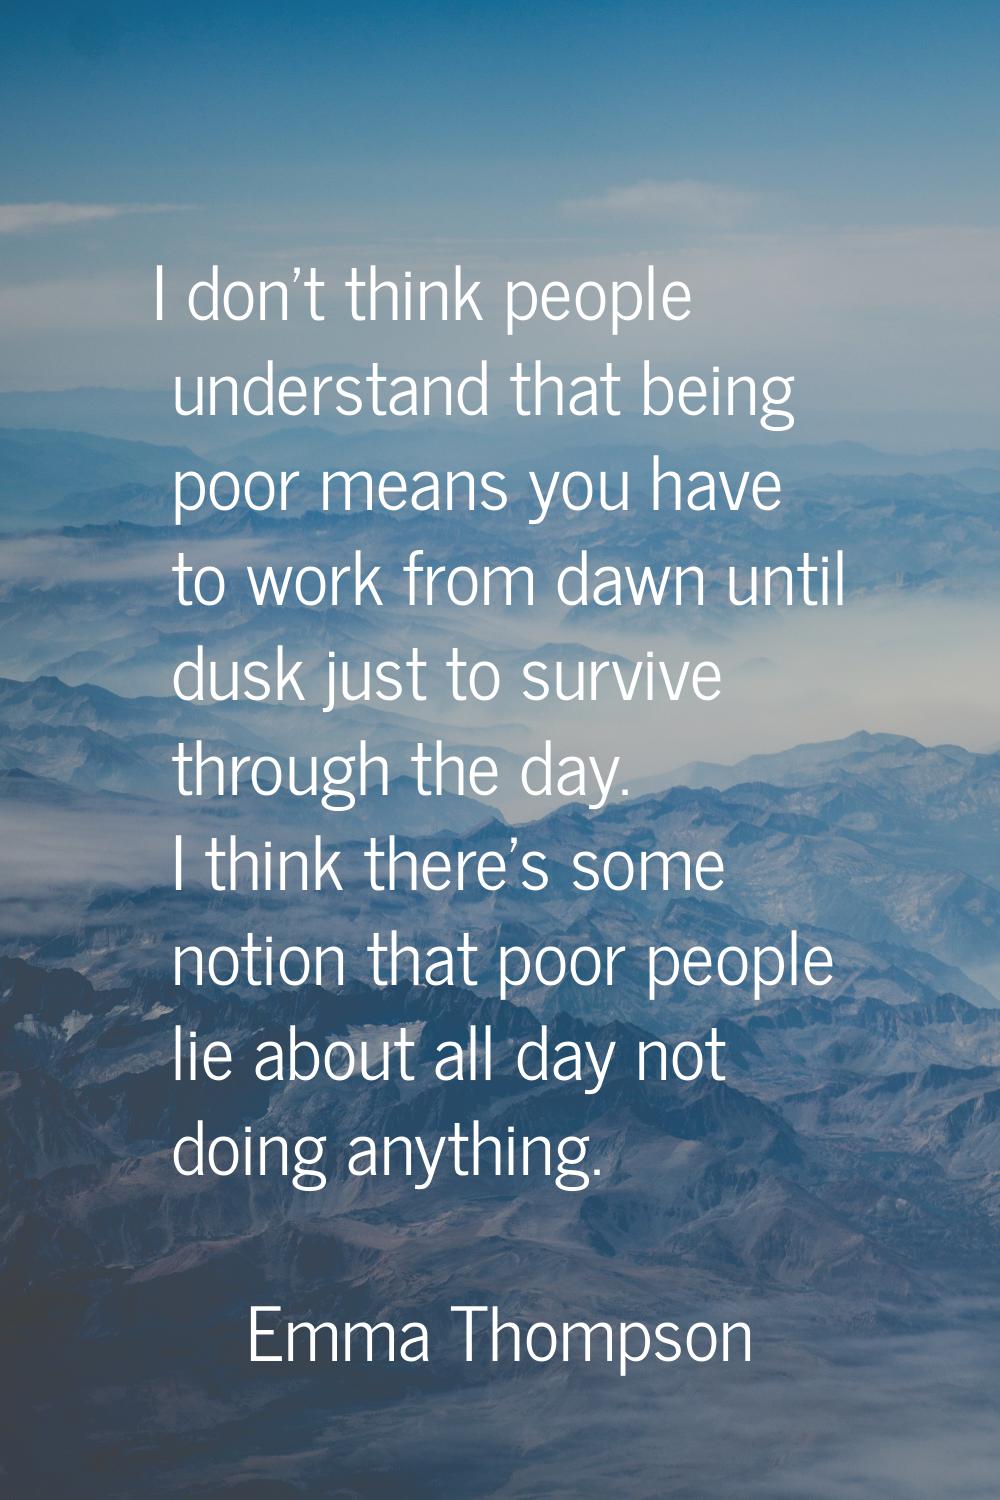 I don't think people understand that being poor means you have to work from dawn until dusk just to